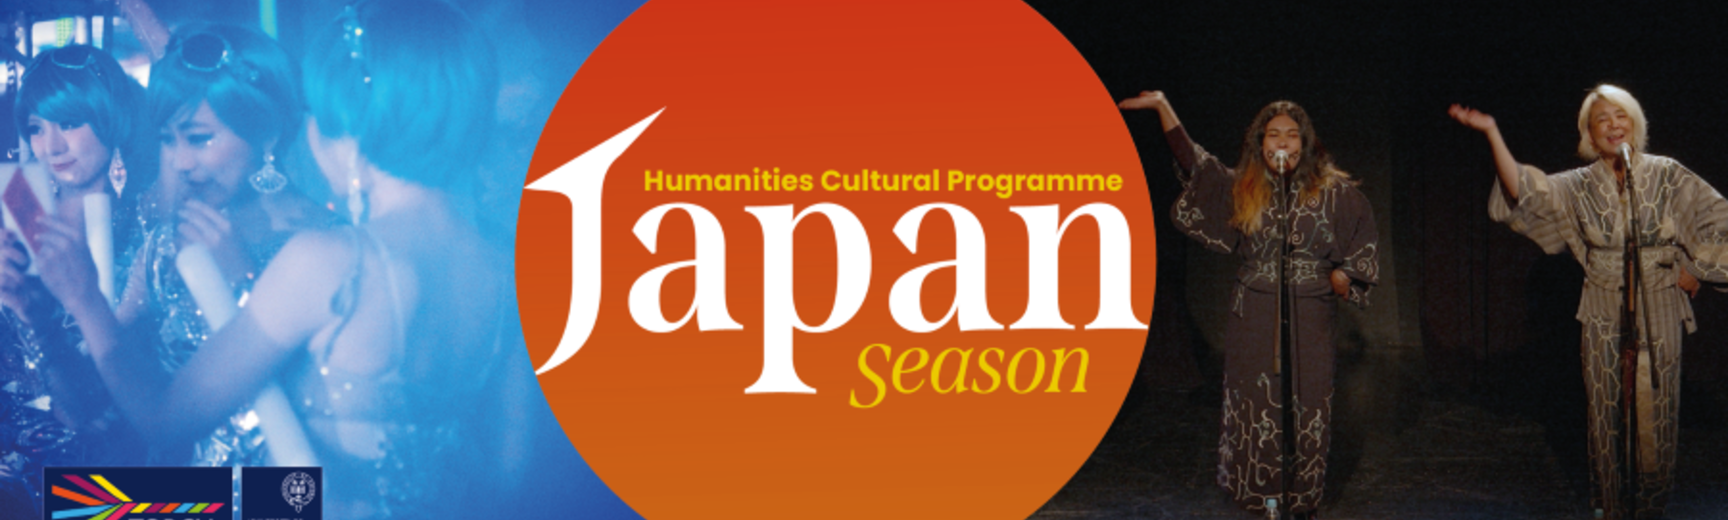 In the centre is an orange circle reading 'Japan season, Humanities Cultural Programme'. On the left is a blue tinted photo of three Japanese women in costume, and on the right is a photo of two Japanese women on stage singing.